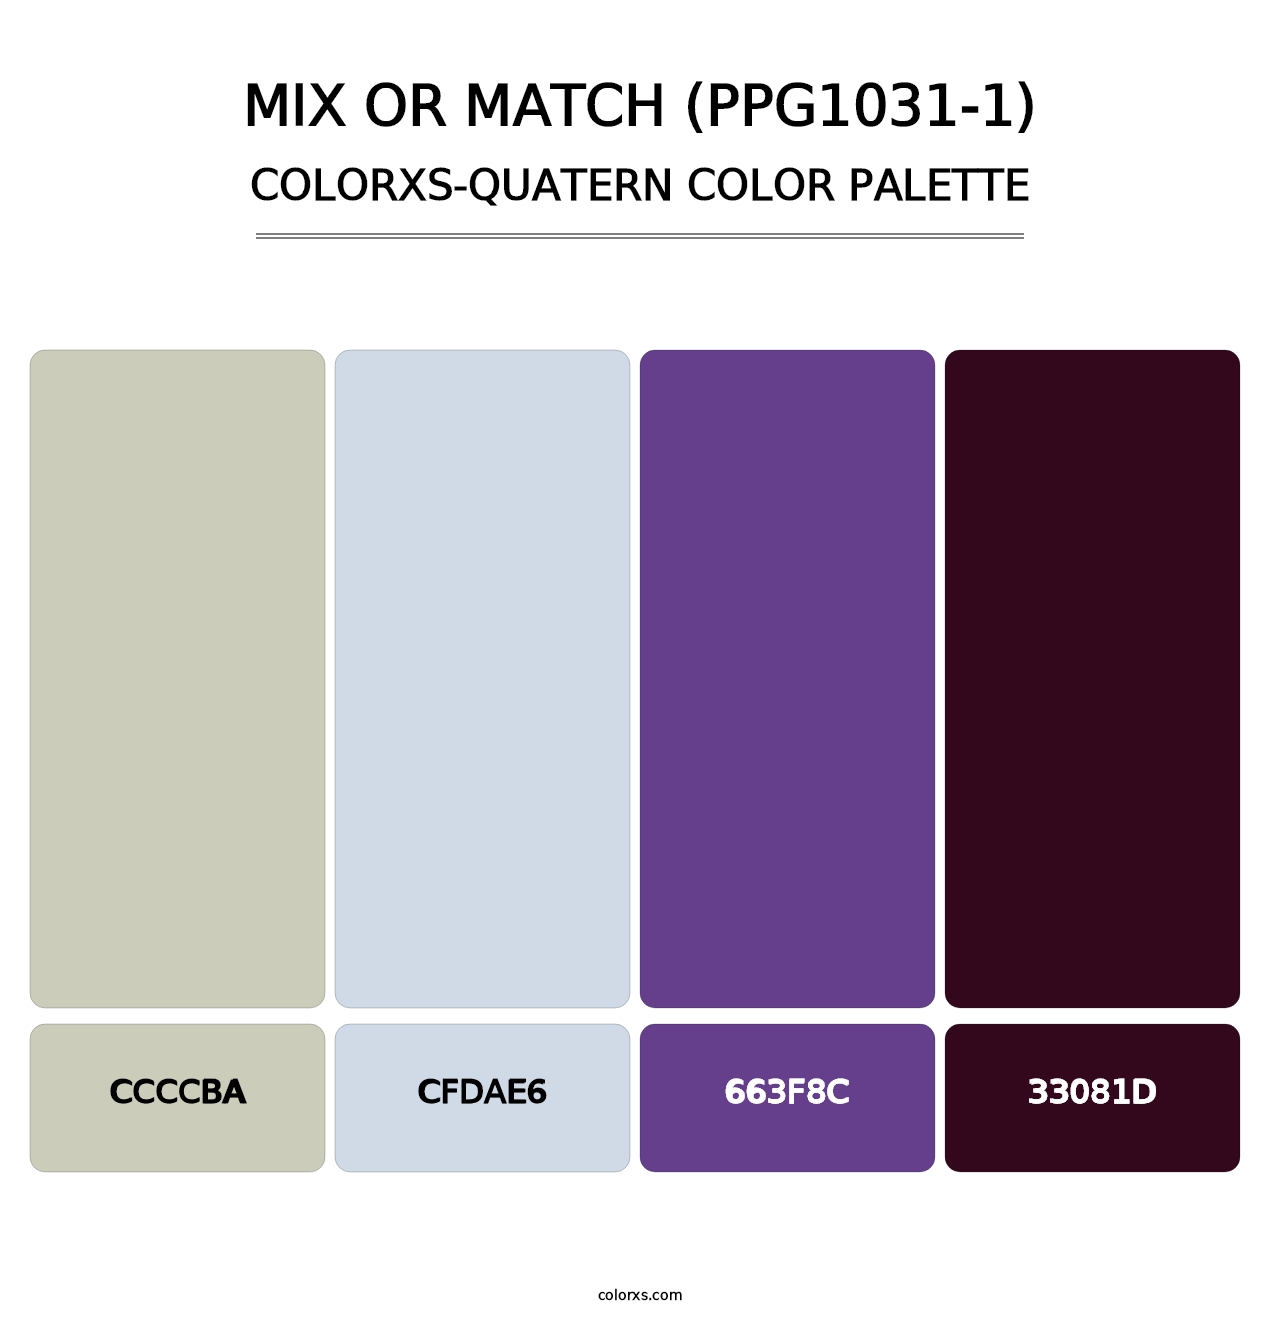 Mix Or Match (PPG1031-1) - Colorxs Quatern Palette